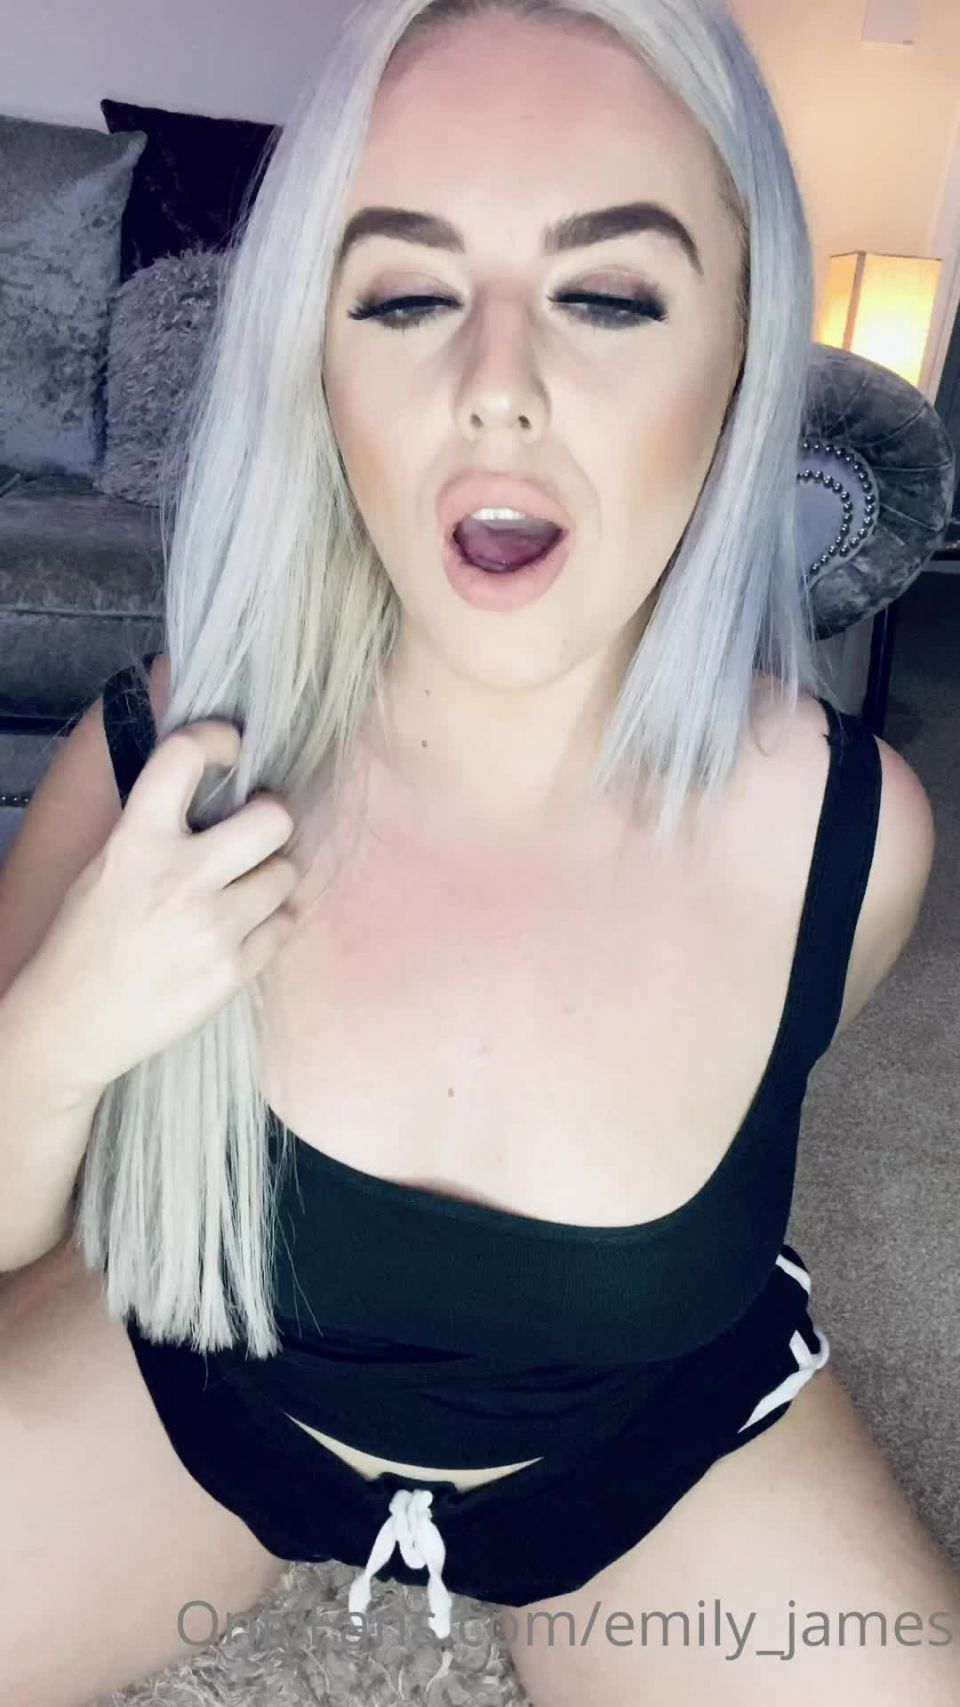 Onlyfans - emily james - emilyjamesFUCK iv missed being a tease Is your other half in bed yet - 26-07-2020